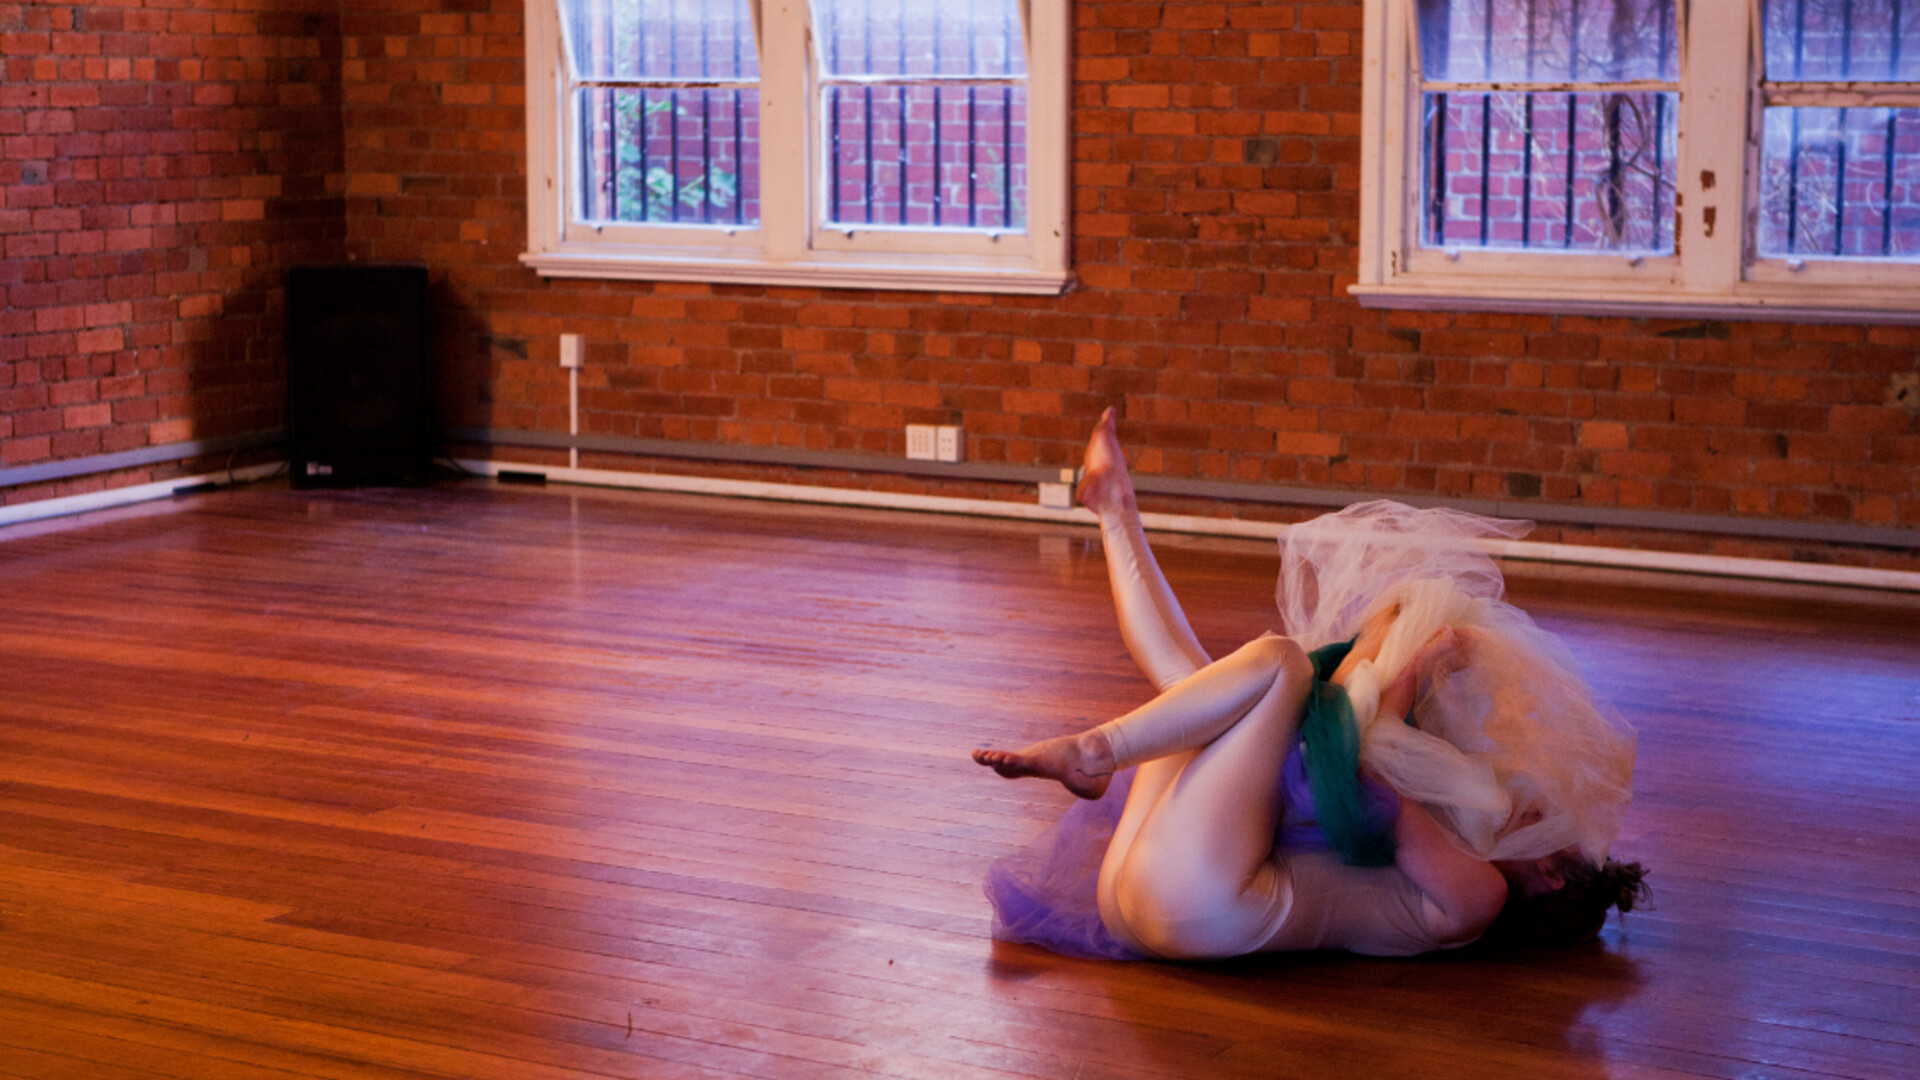 A woman lies on a wooden floor in white tights clutching material that covers her front.